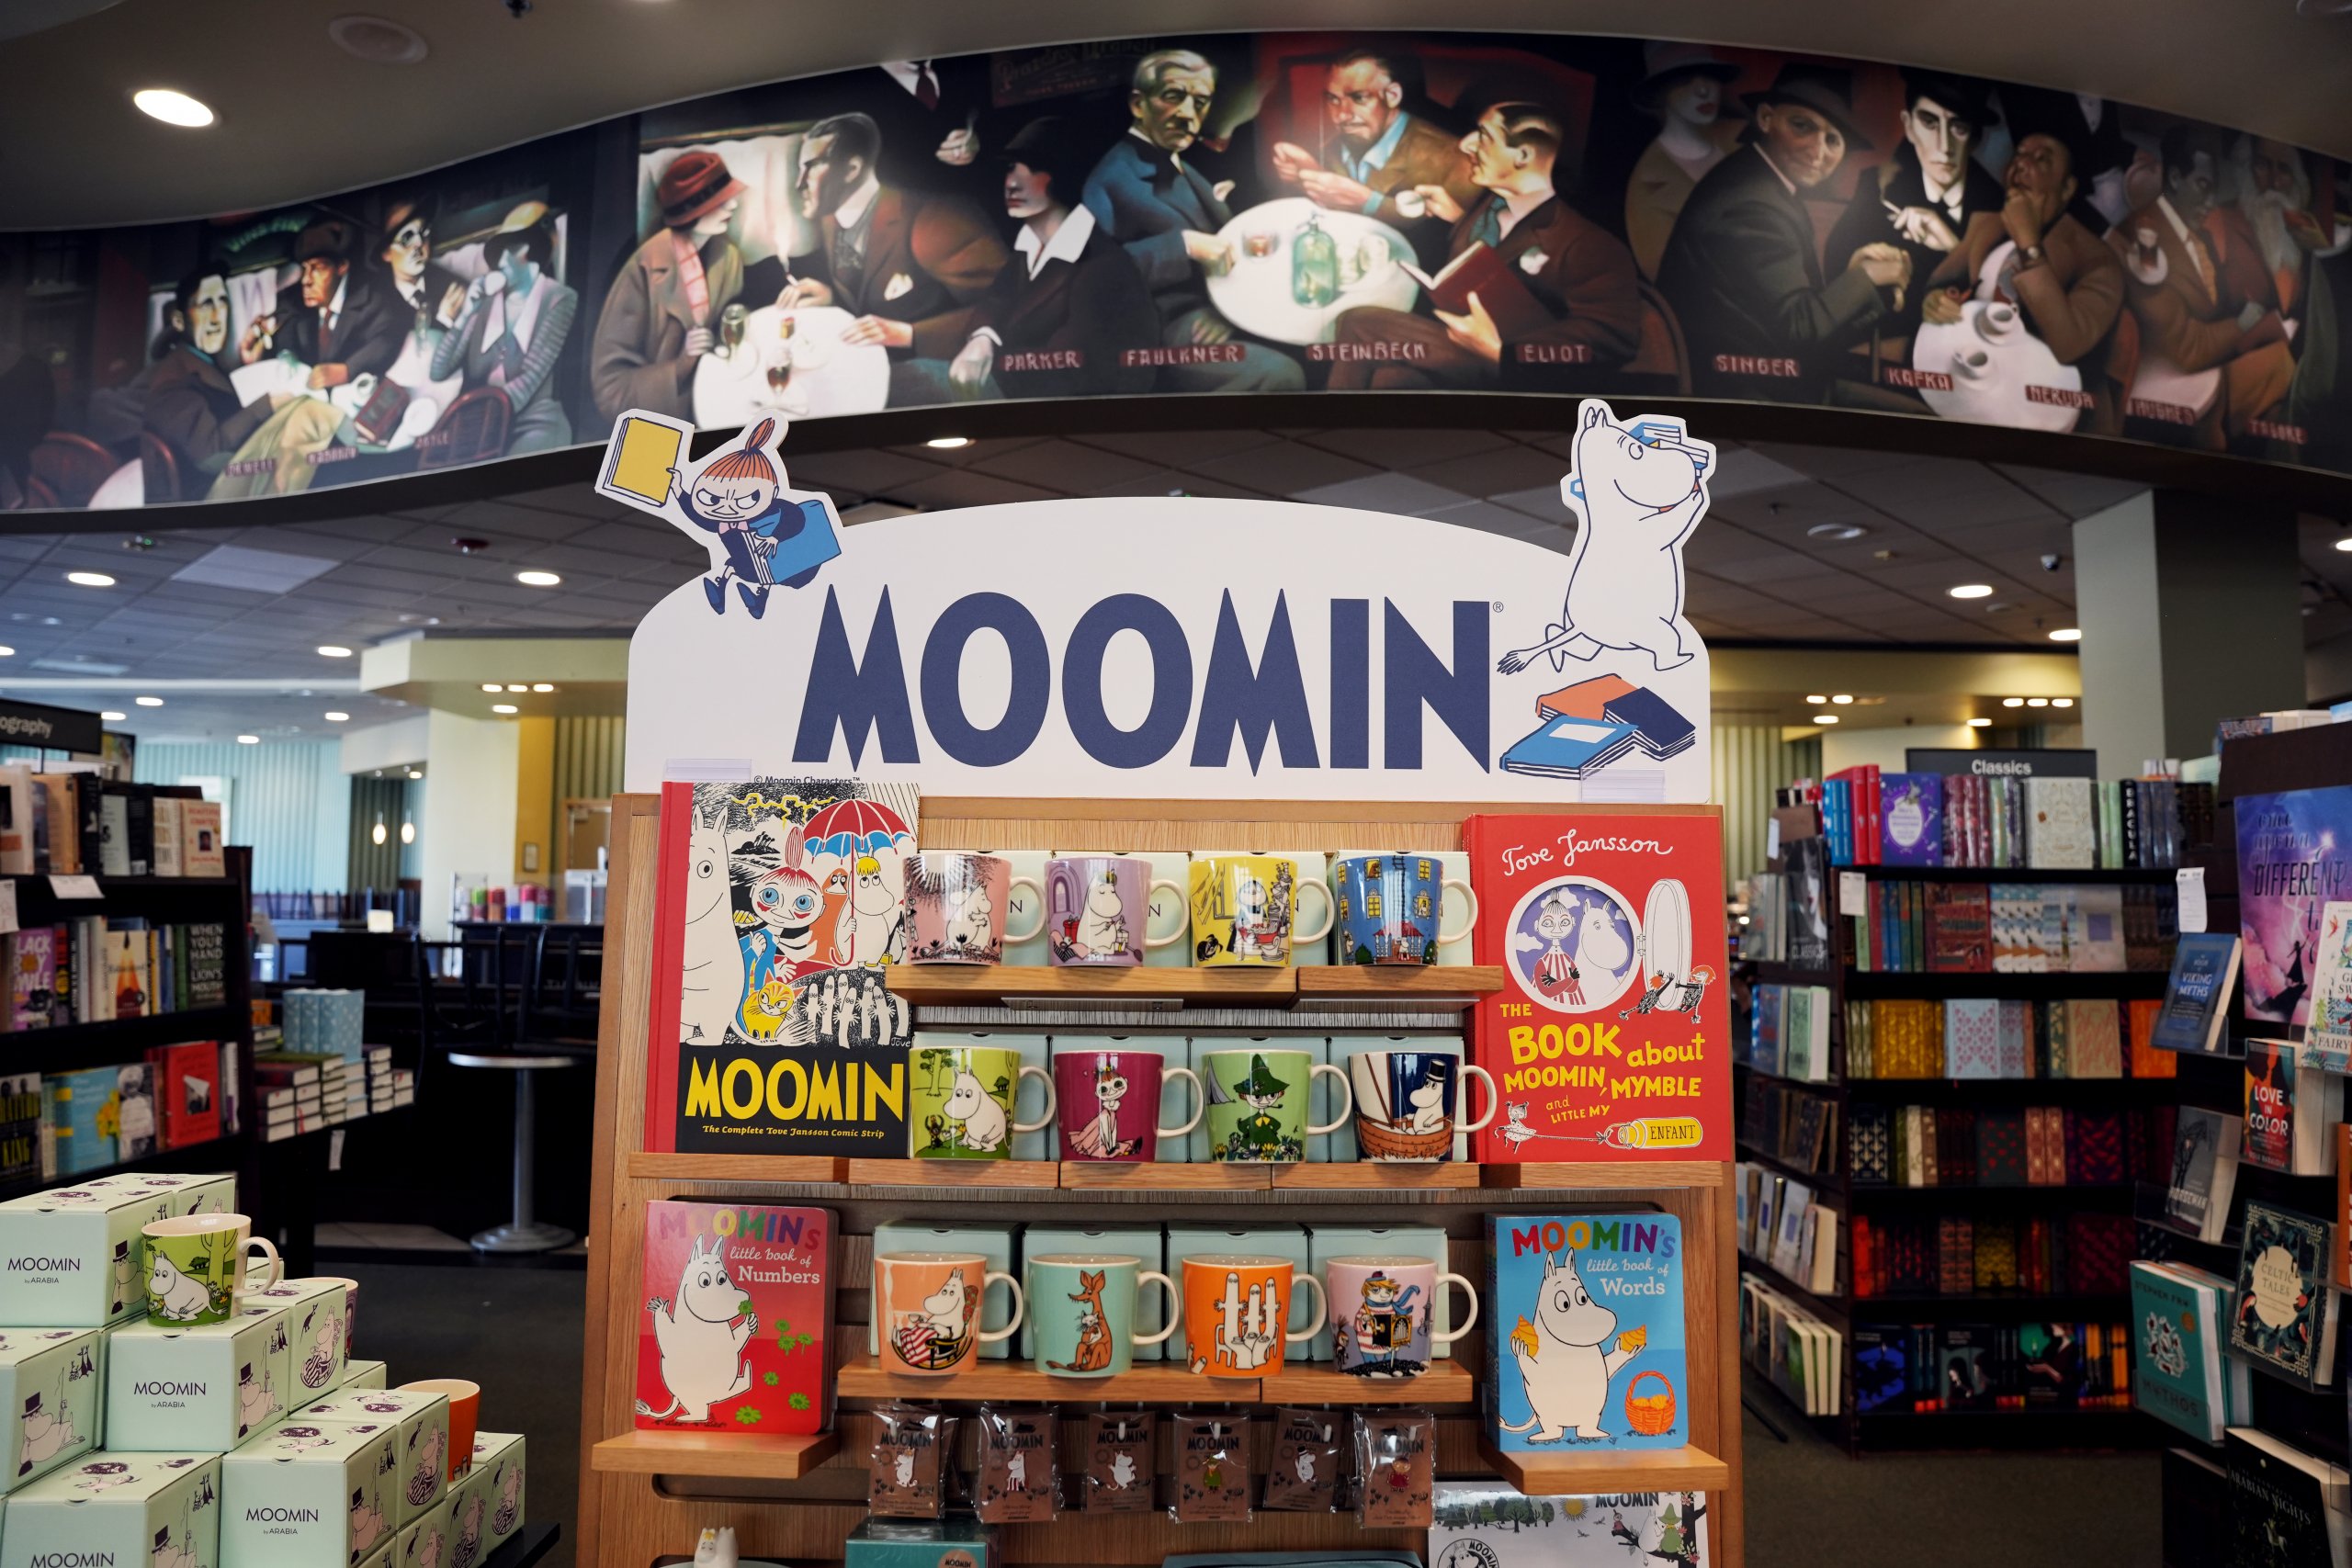 Get to Know the Moomins: Discover Which B&N Locations Have Moomin